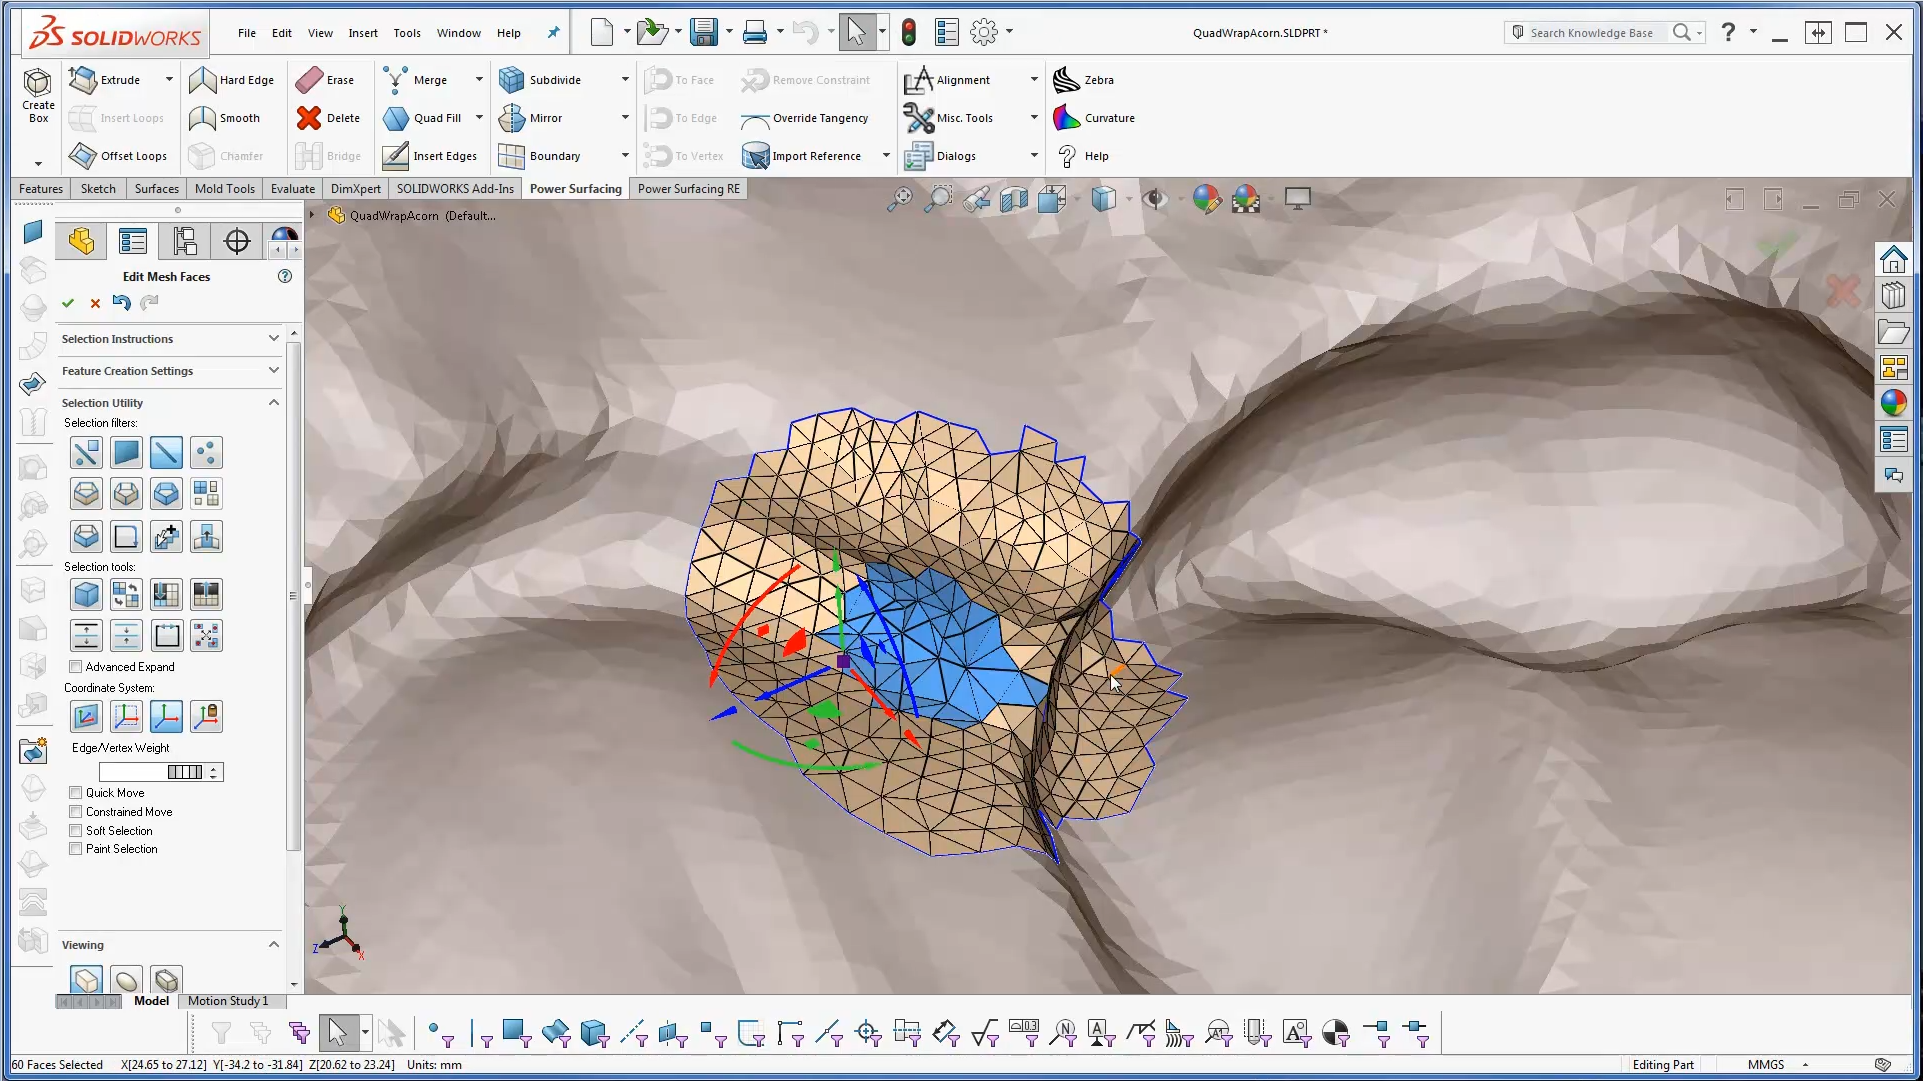 Working with Power Surfacing RE v8.0 for SolidWorks 2020-2023 full license